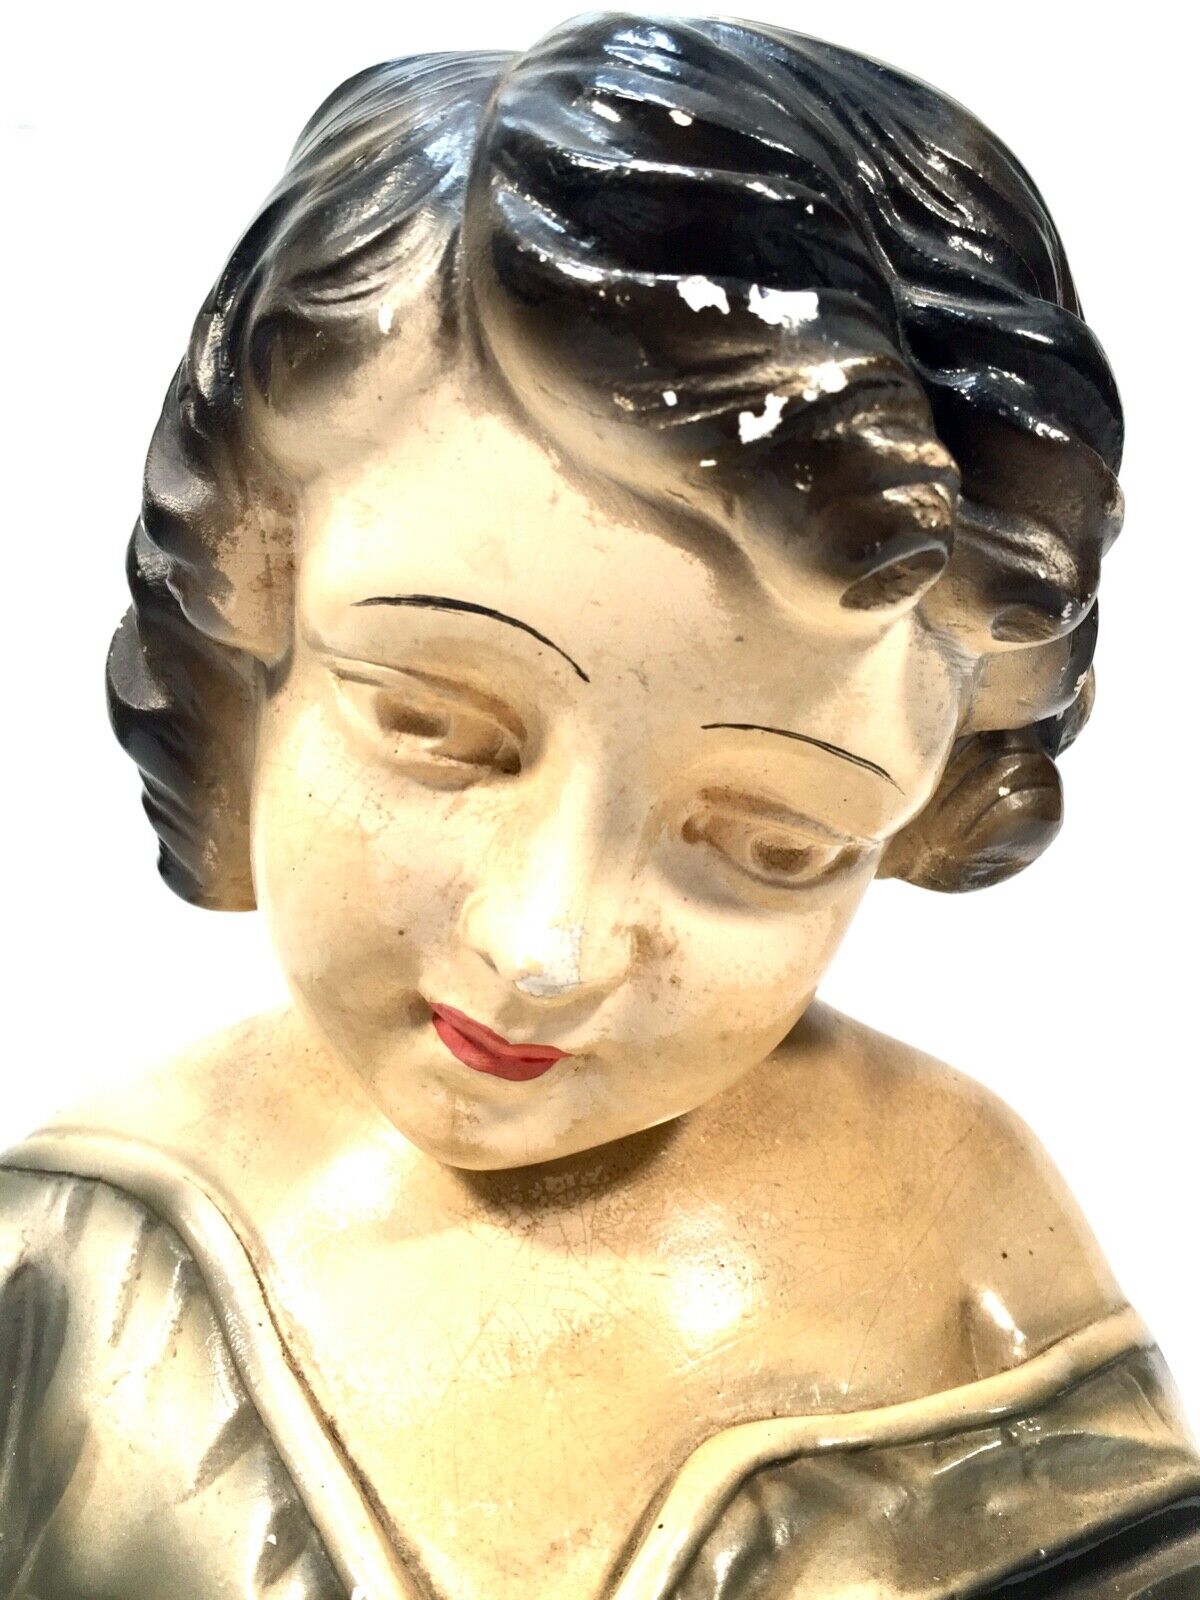 Antique Art Deco French Young Girl Plaster Portrait Bust / C.1930 / Hand Painted